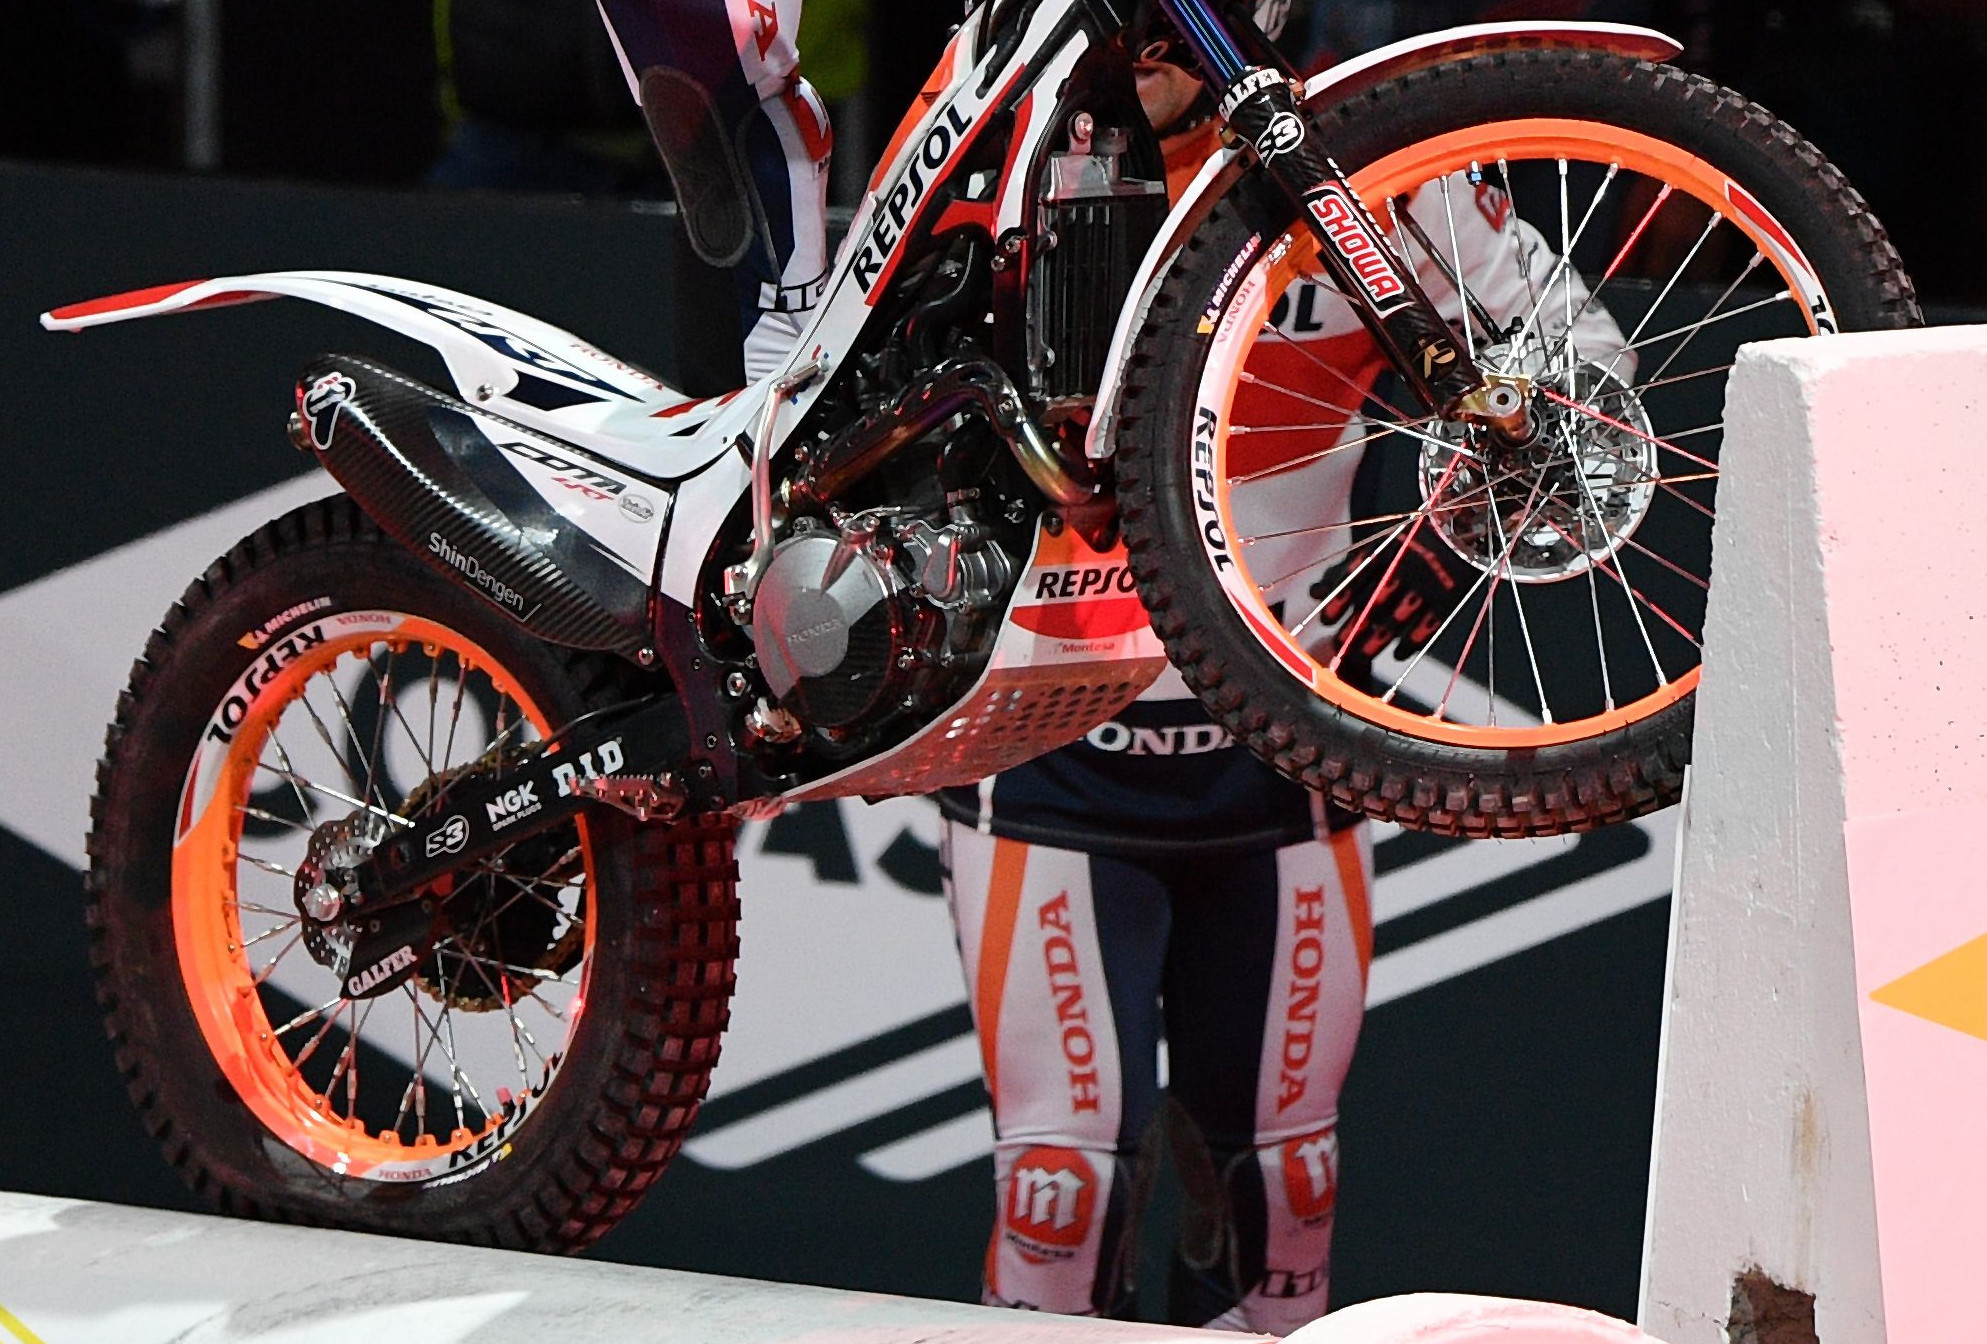 Spanish rider Toni Bou adds to his legend with his 17th X-Trial World title